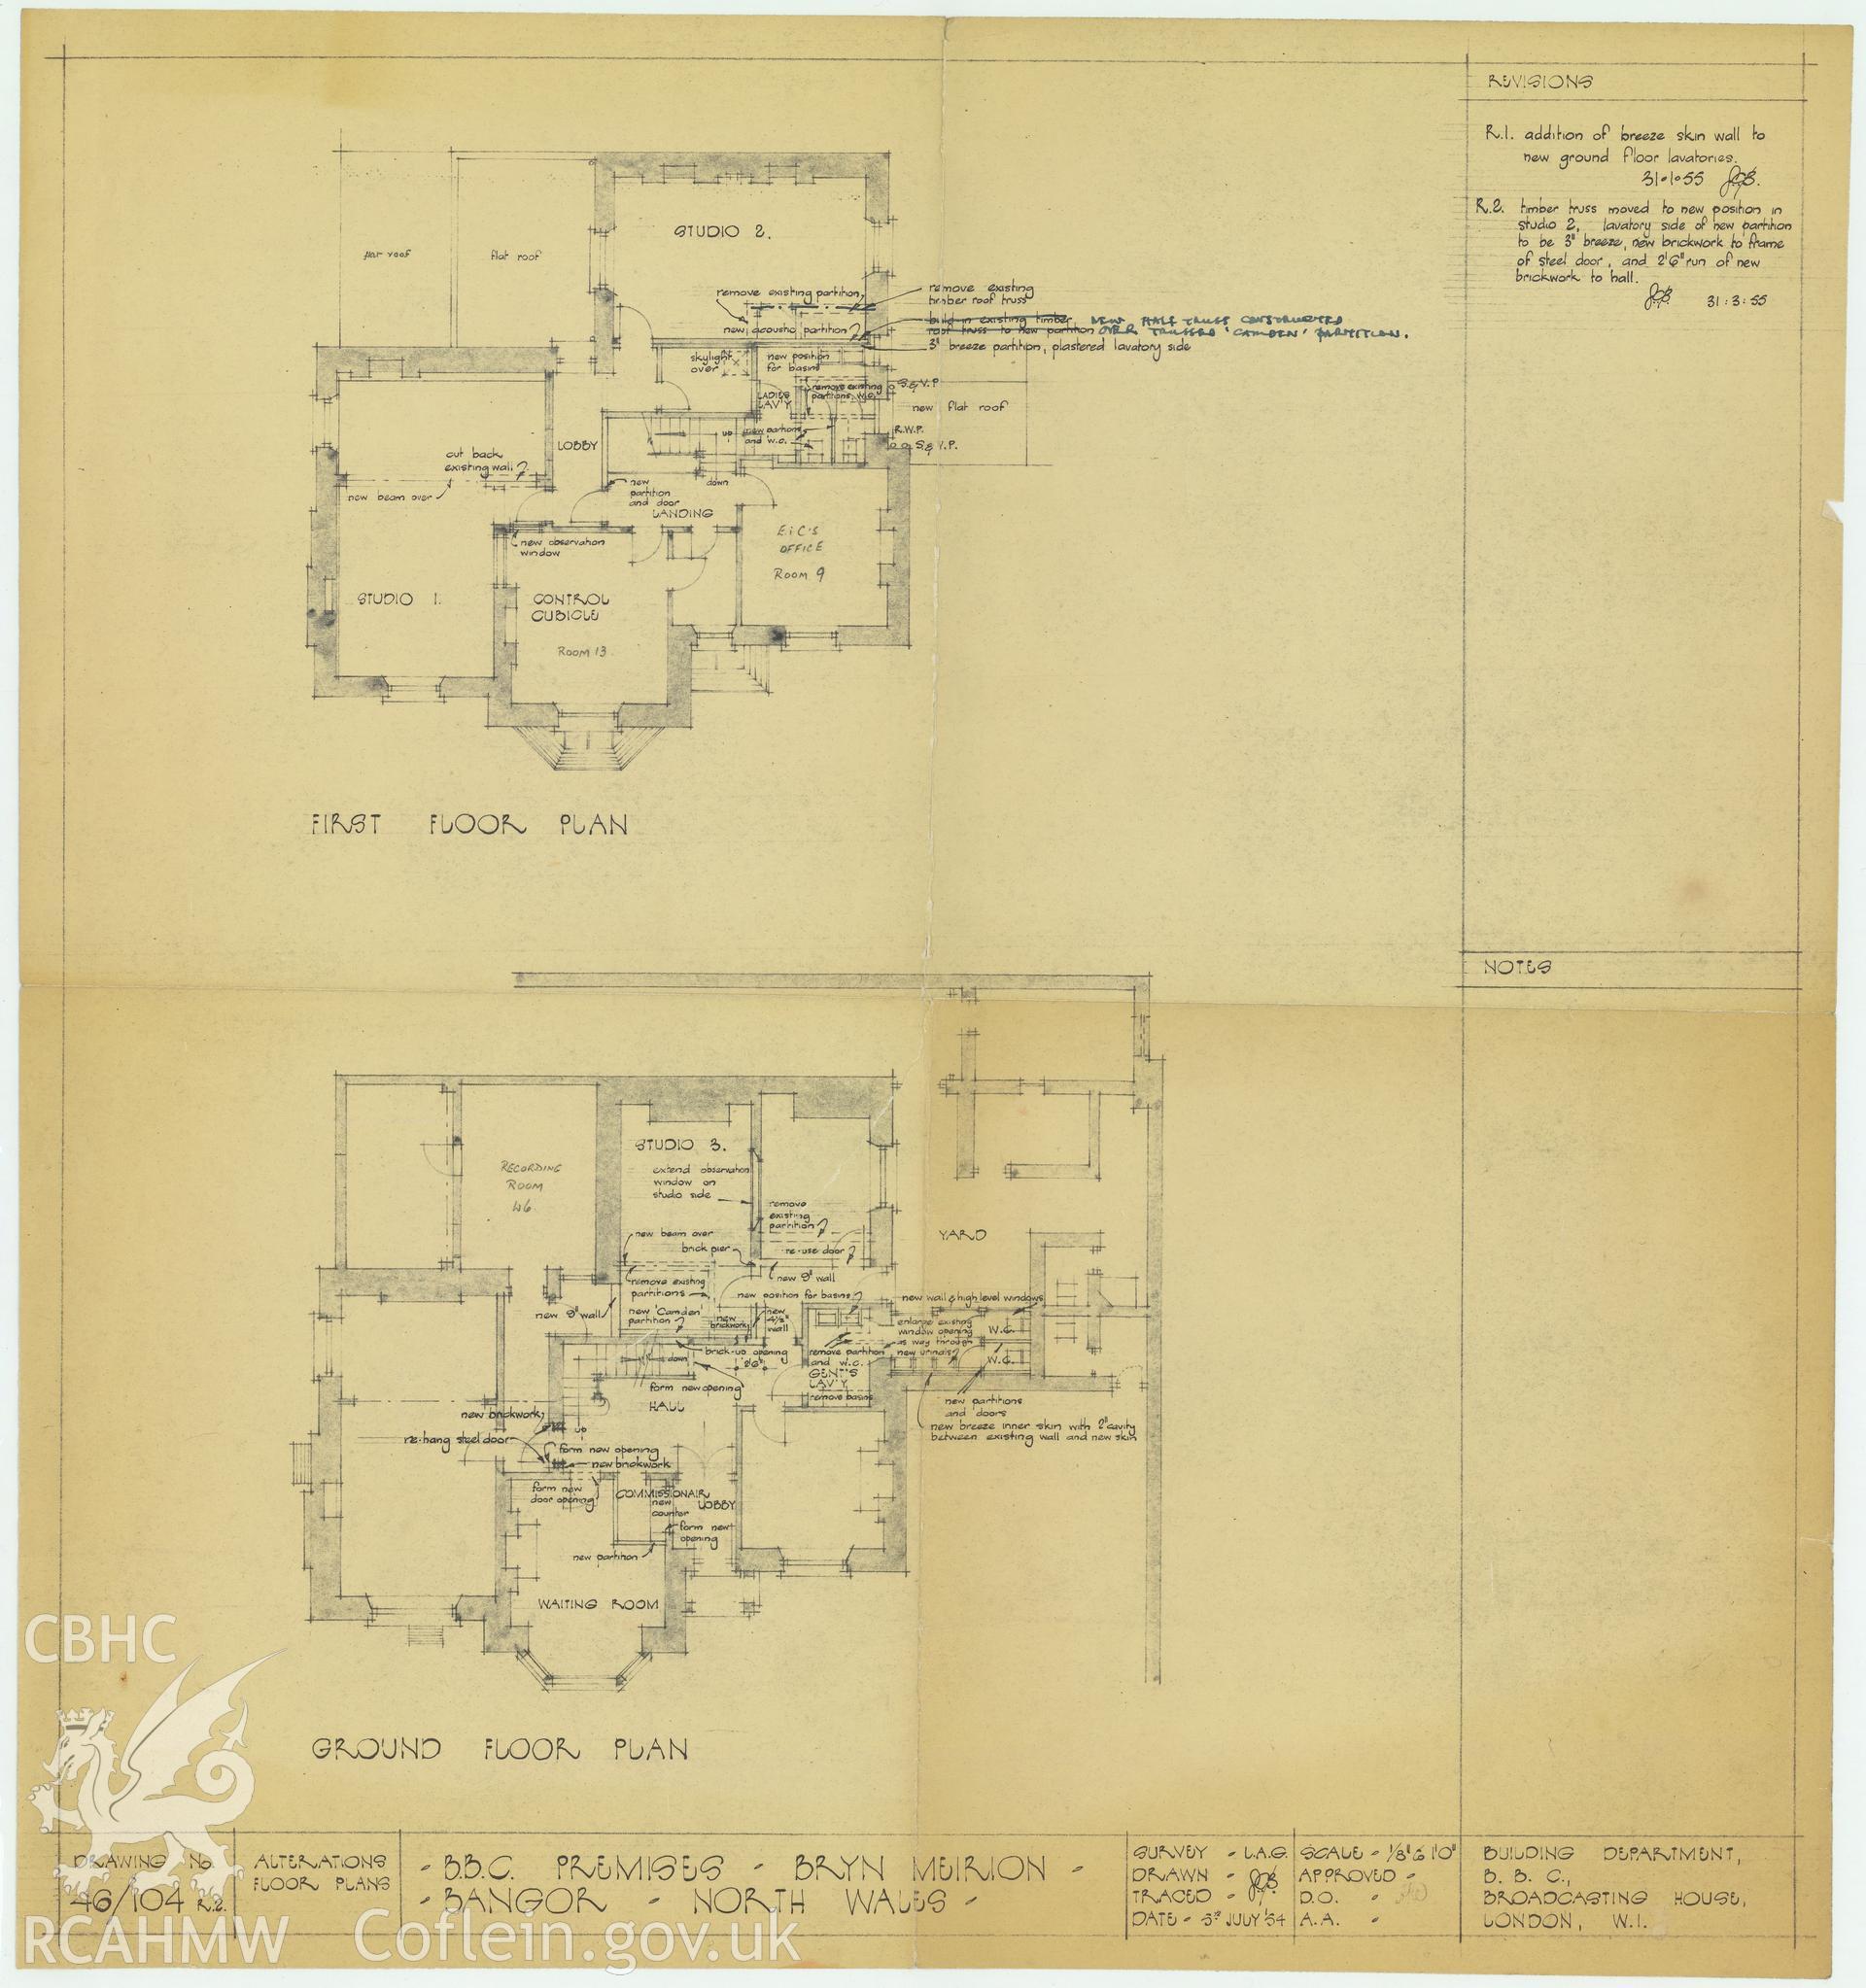 BBC premises, Broadcasting House, Bangor - ground and first floor plans of Bryn Meirion. Drawing No.46/104 R2, July 1954.